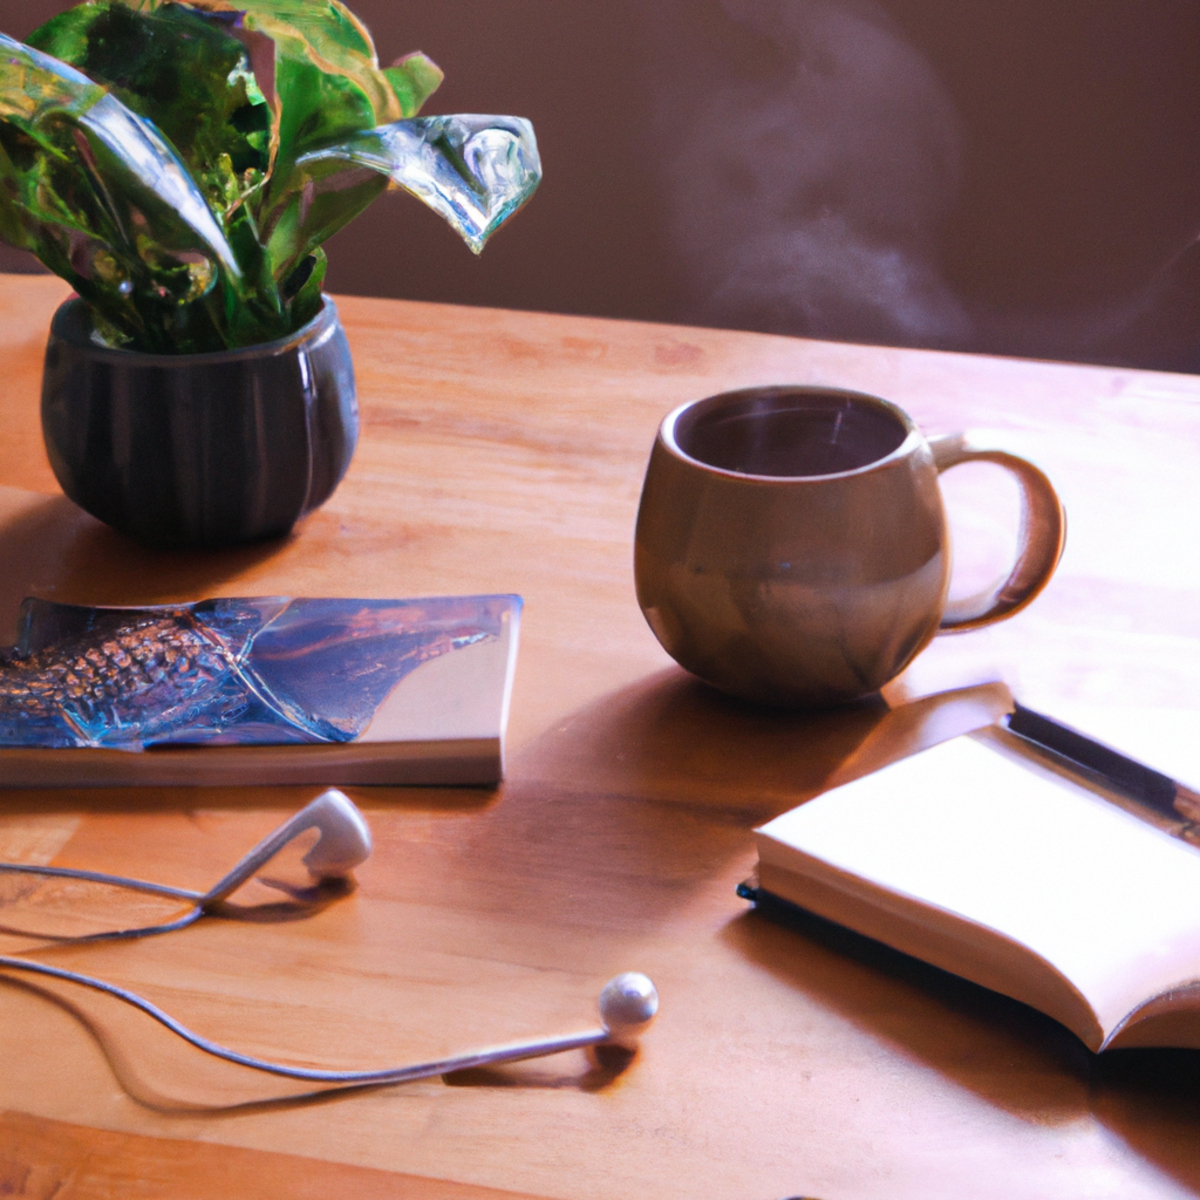 Mindfulness For Stress Reduction - Cozy desk setup with tea, journal, and plant, promoting daily stress management and connection with nature.